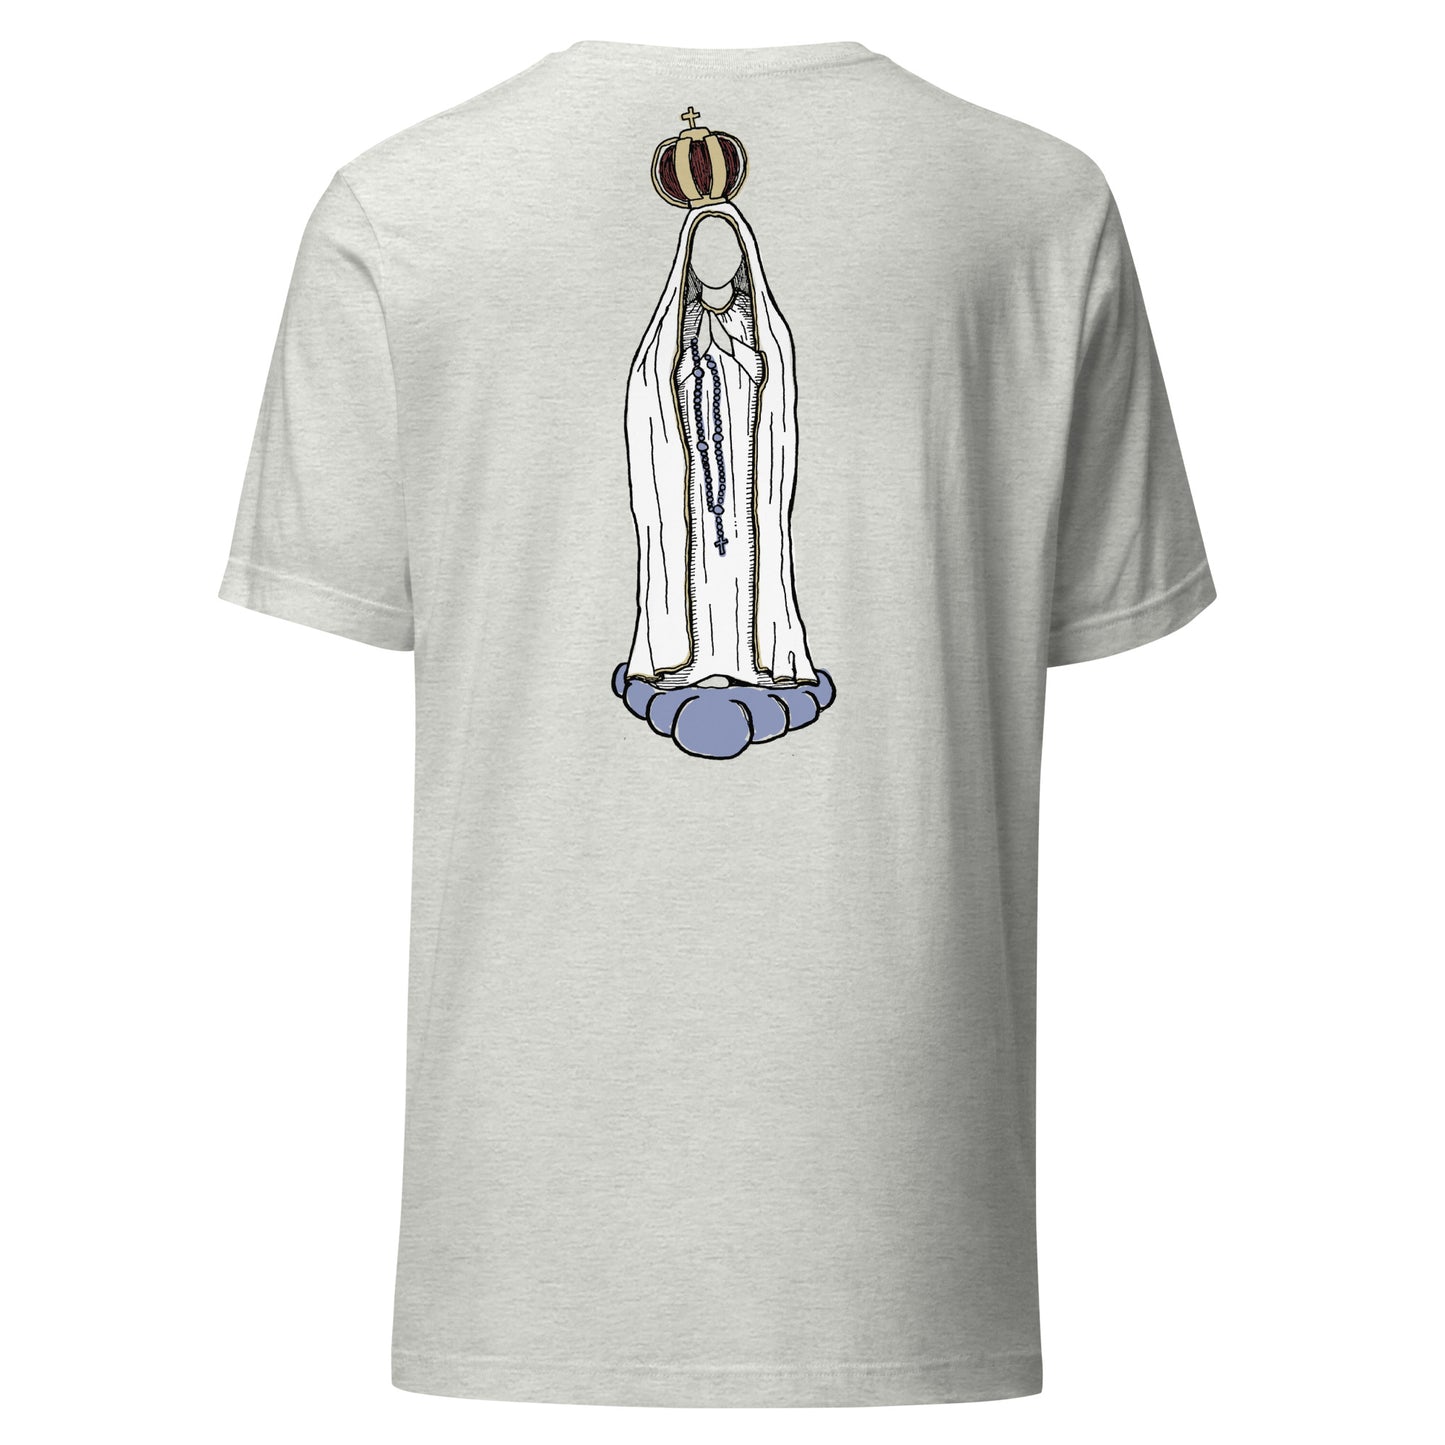 "Our Lady of Fatima" - Unisex t-shirt